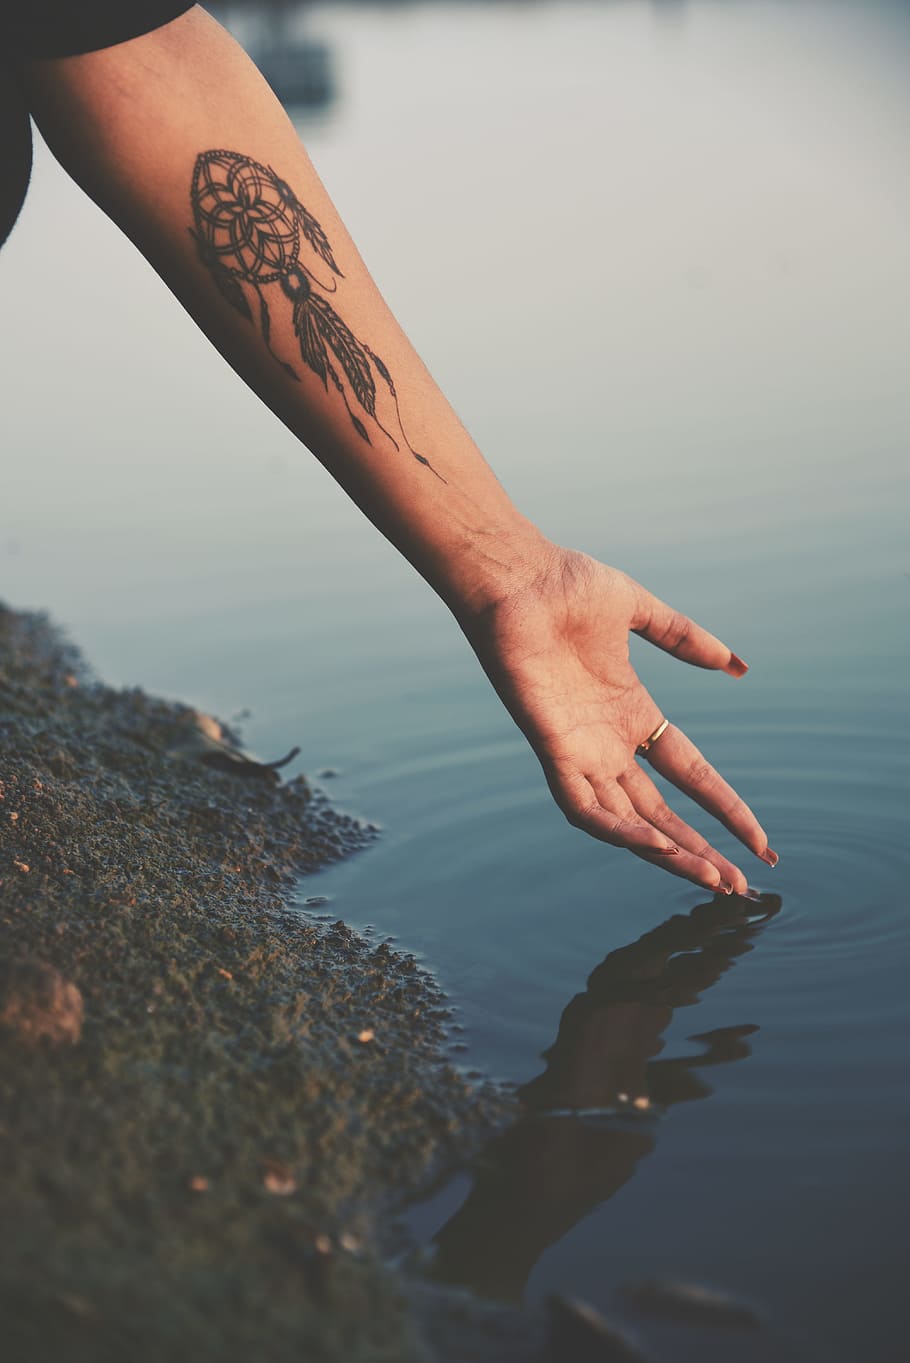 Hd Wallpaper Person Hand Reaching Calm Water With Dreamcatcher Tattoo Woman With Dream Catcher Arm Tattoo Wallpaper Flare